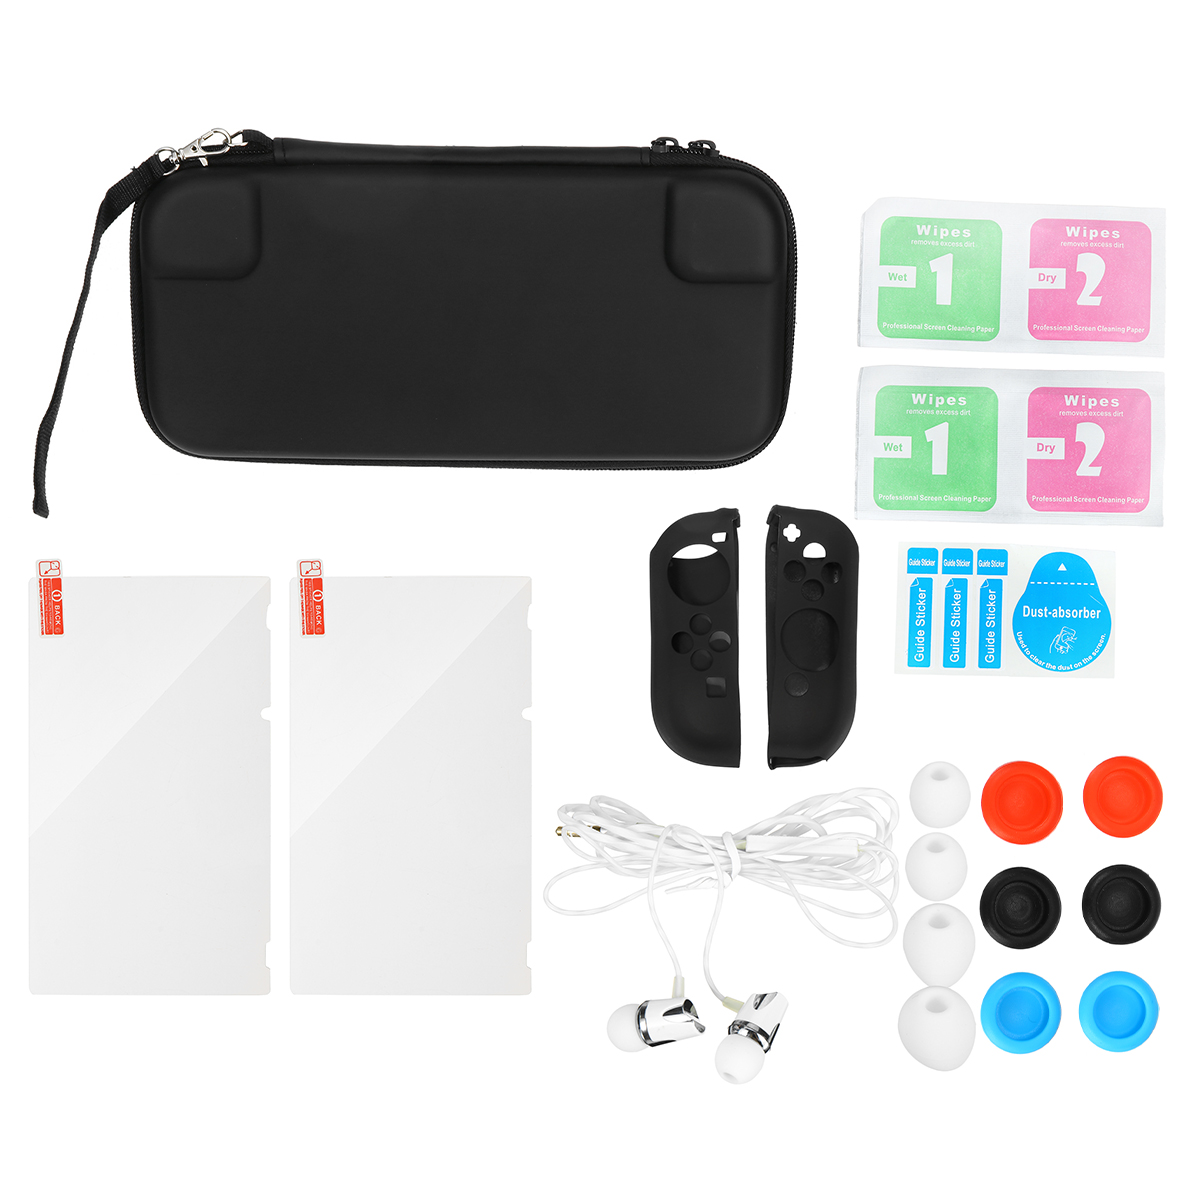 12-in-1-Storage-Bag-Shell-Cover-Protective-Film-Carry-Case-Headset-for-Nintendo-Switch-Game-Console-1698705-1